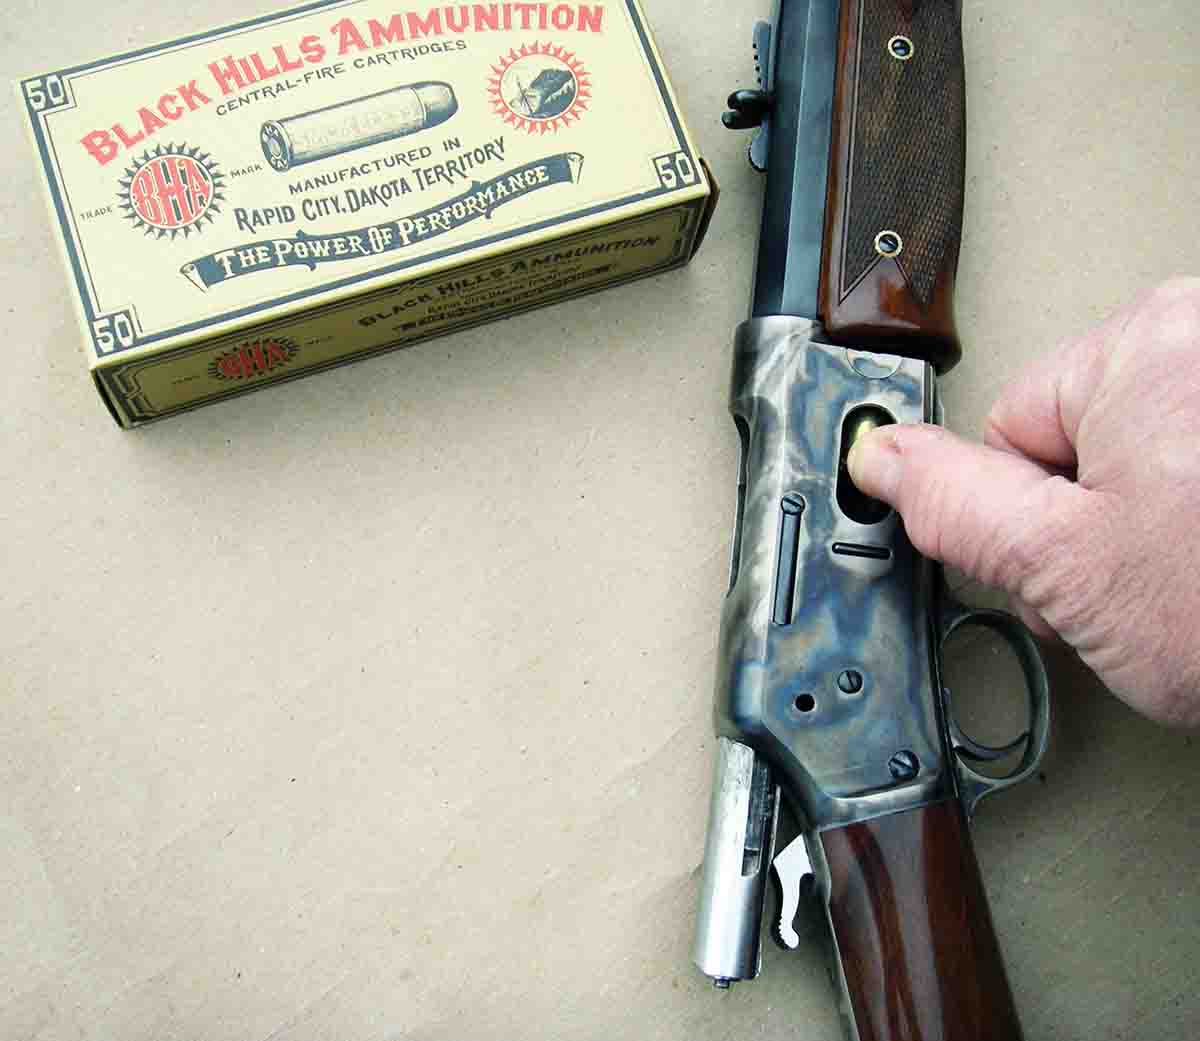 The action must be opened, with breechblock to the rear, to allow cartridges to be inserted through the loading gate and into the tubular magazine.